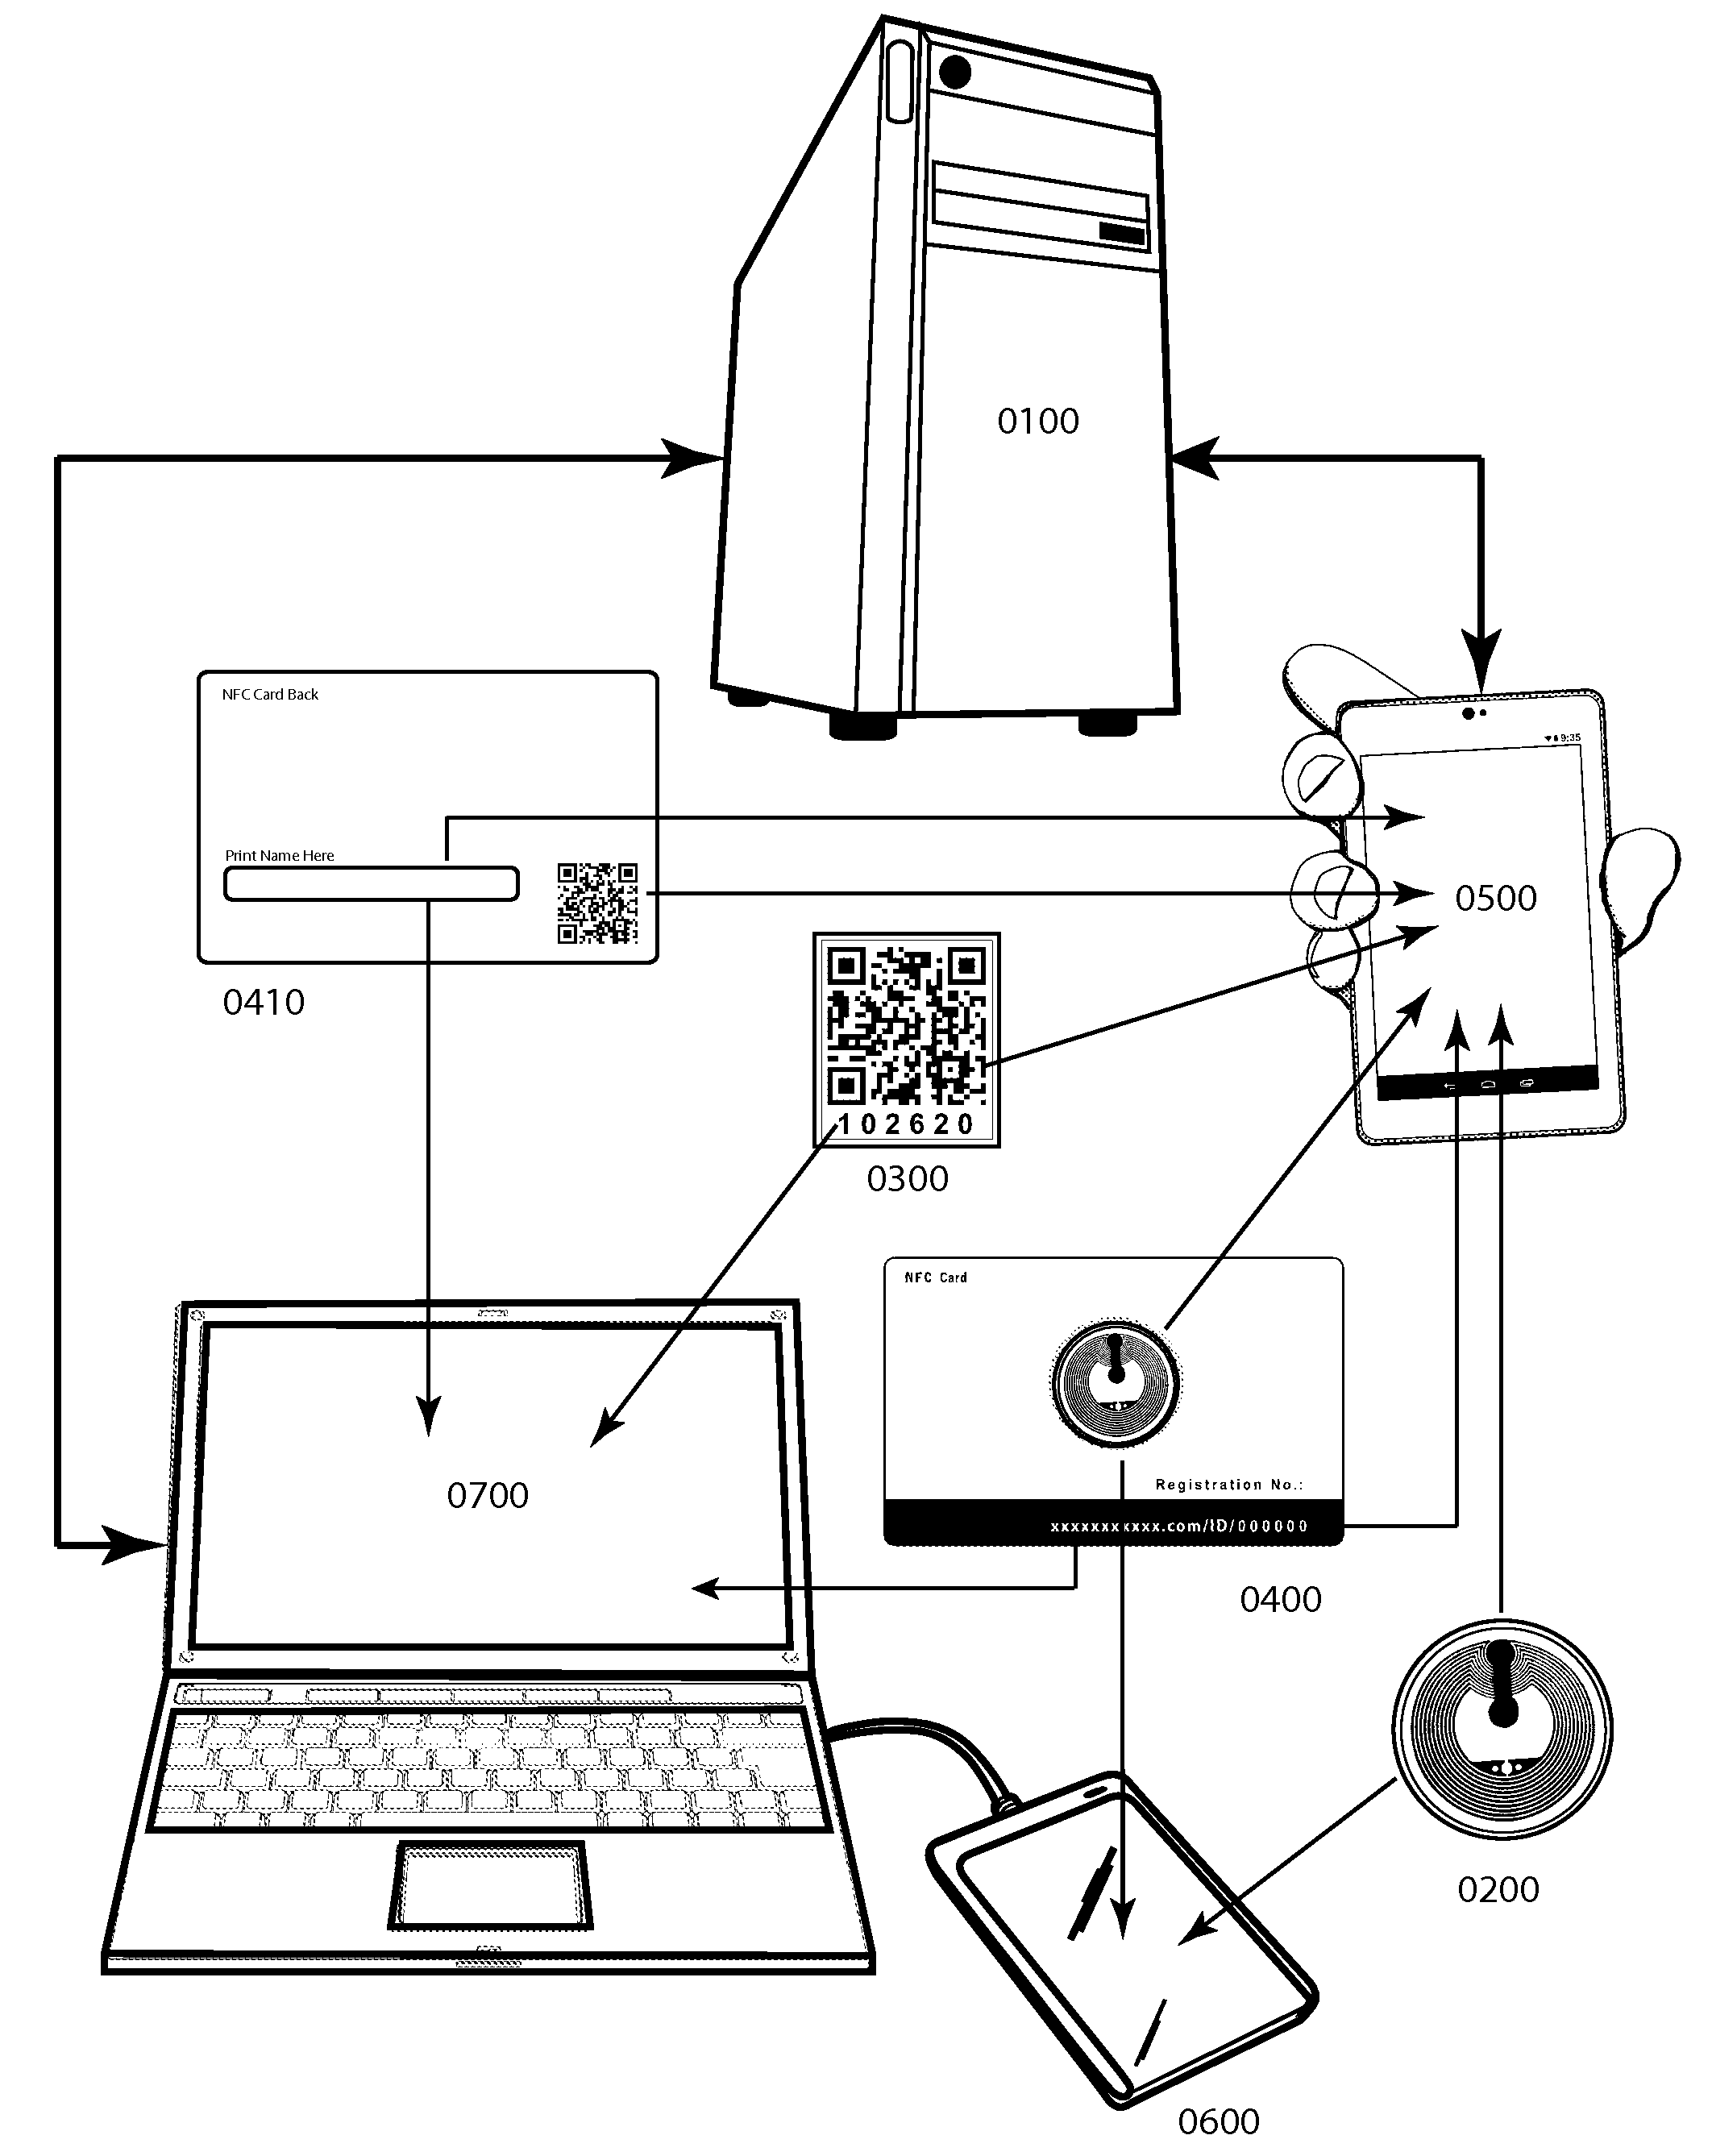 System and Method Employing Near Field Communication and QR Code Technology to Access and Manage Server-Side Personal and Business Property Security Status Accounts